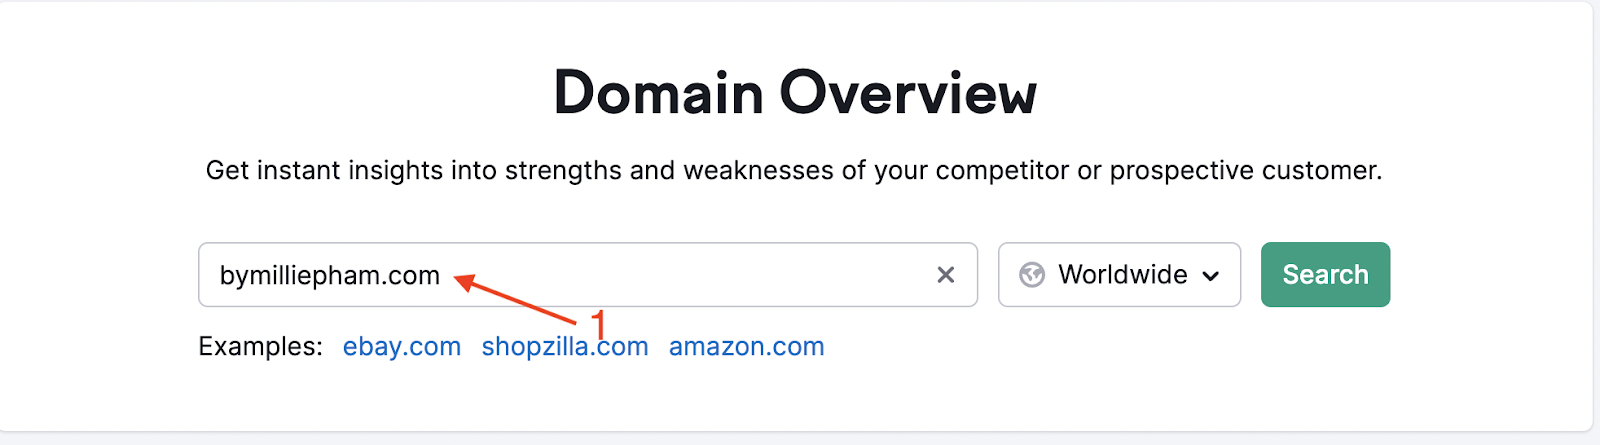 "Domain Overview" feature in Semrush